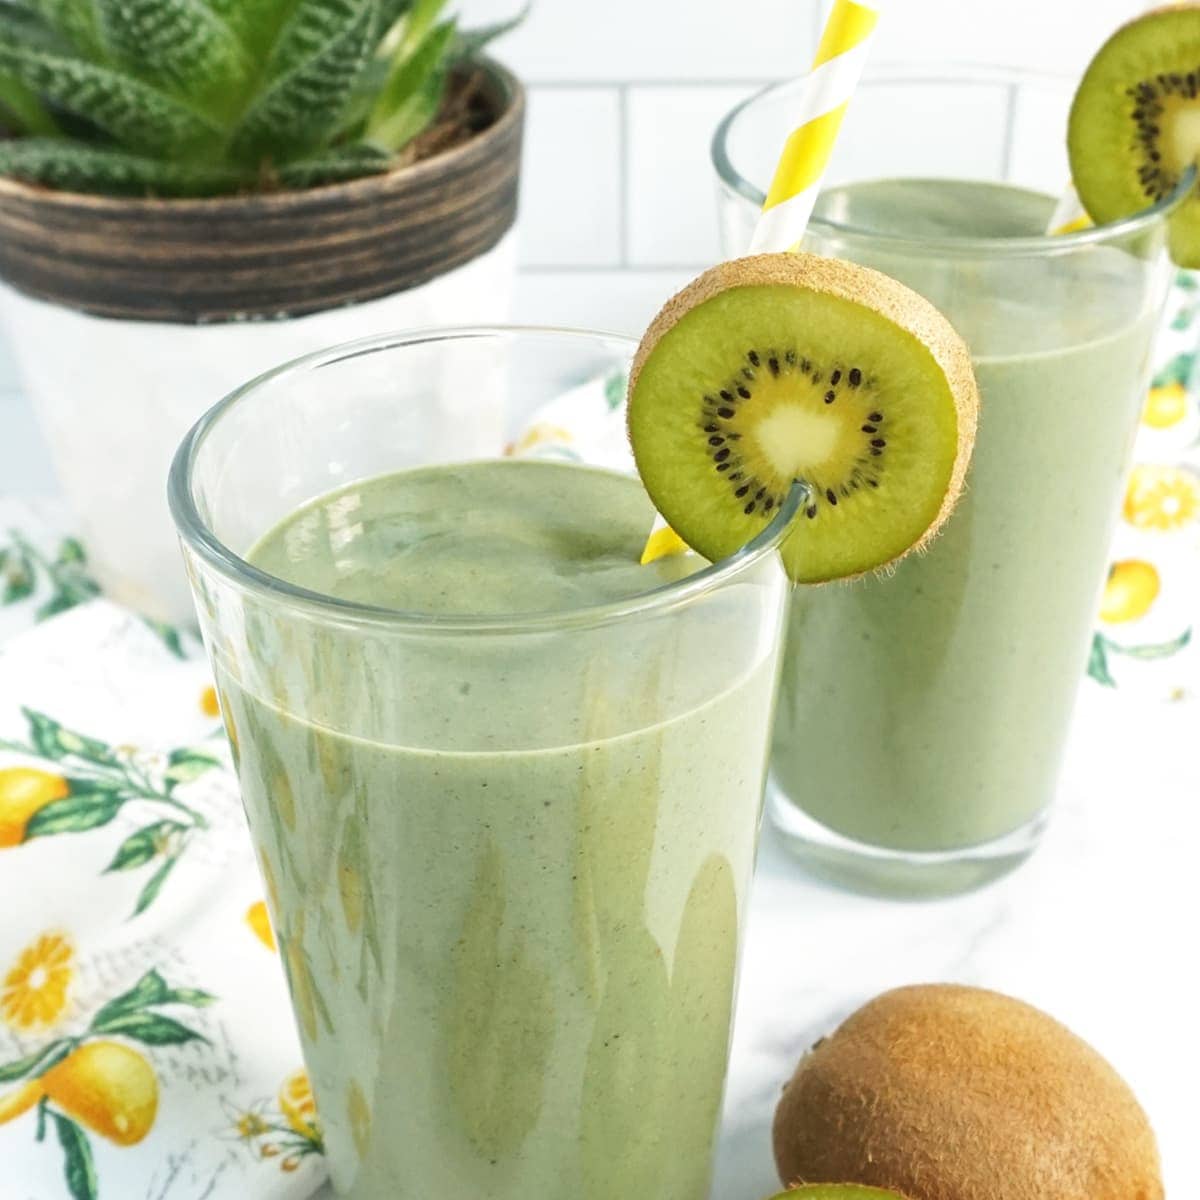 Cup of Green Detox Smoothie with a kiwi and a yellow straw